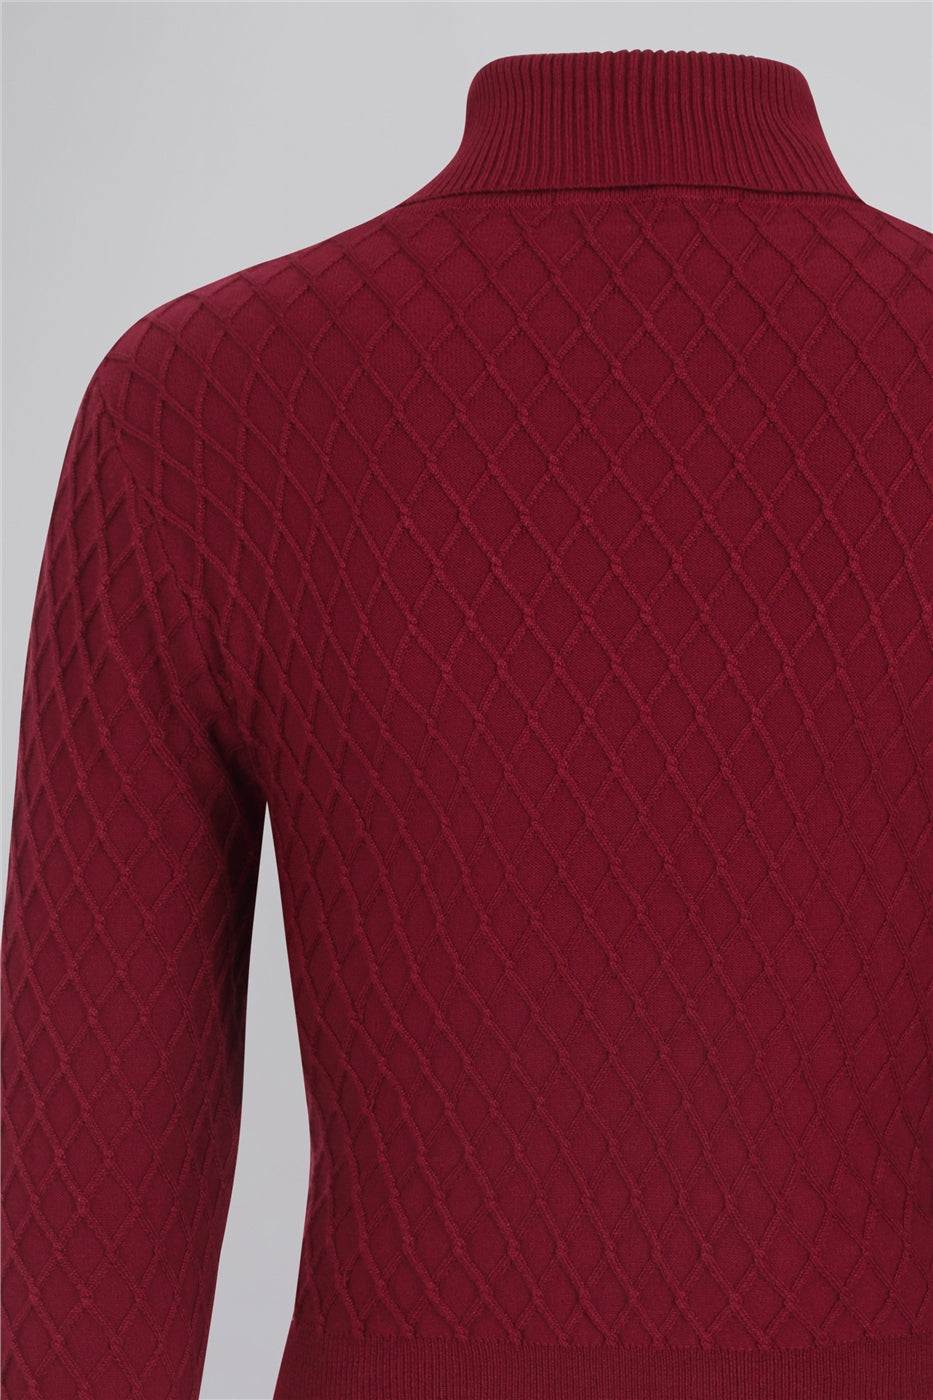 Closeup of lattice knitted jumper. The lattice pattern is diamond shaped and criss crosses diagonally